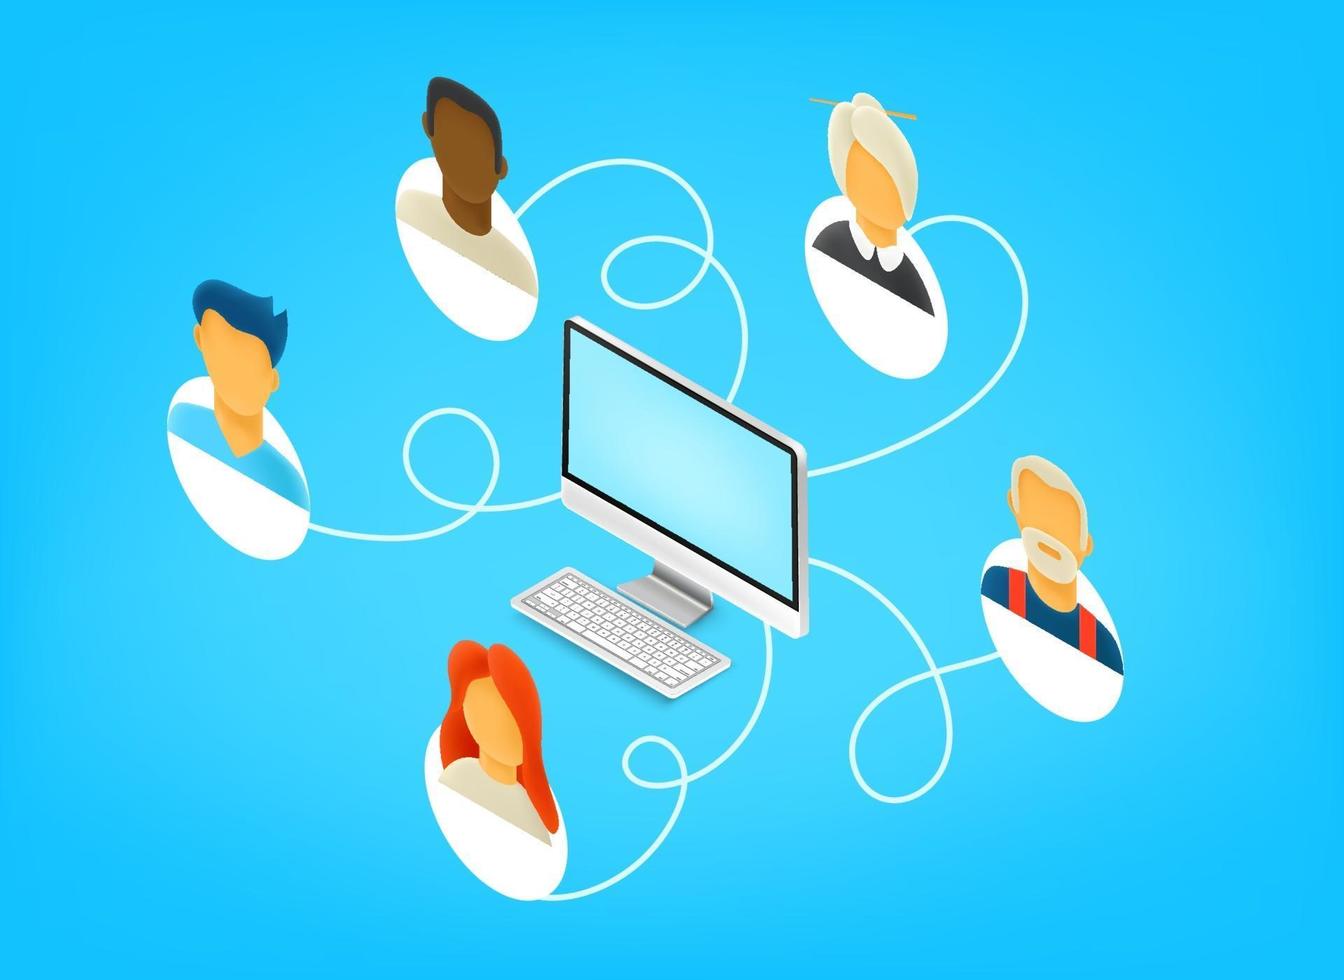 Team working together remotely via internet. Isometric 3d style vector illustration